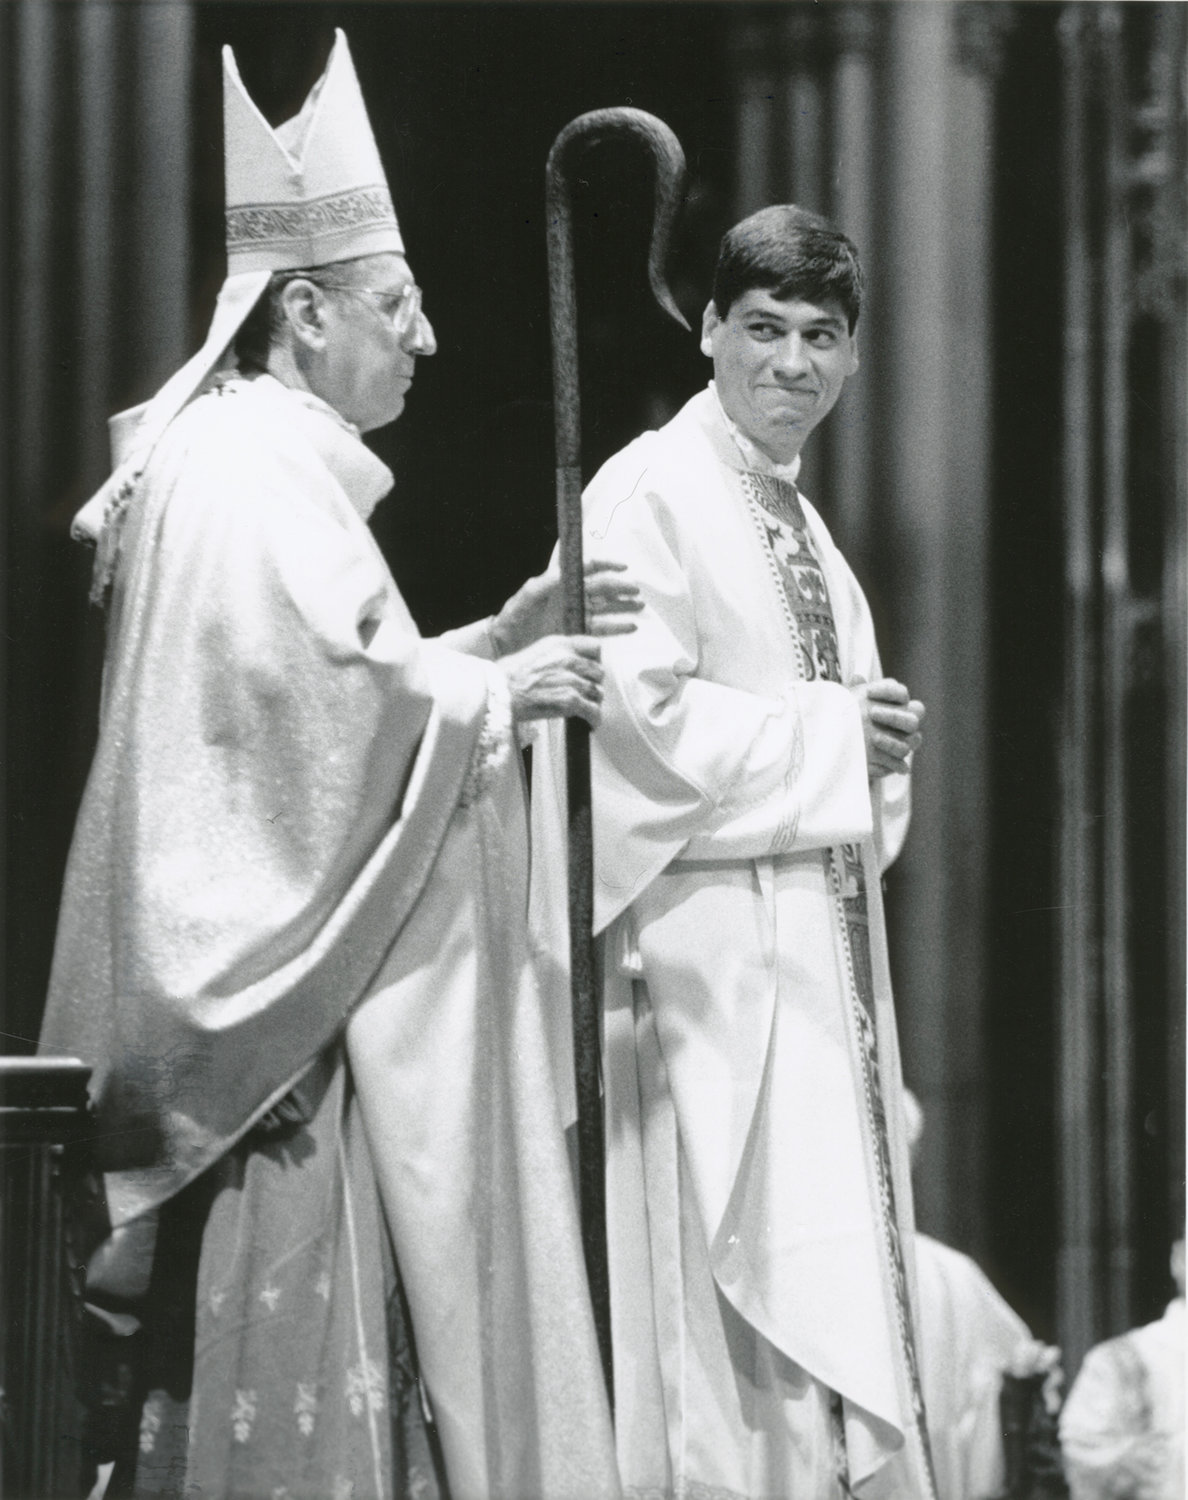 ANSWERING THE CALL—Father John Bonnici shows his gratitude as he is congratulated by Cardinal John O’Connor, who ordained him to the priesthood June 22, 1991, at St. Patrick’s Cathedral.